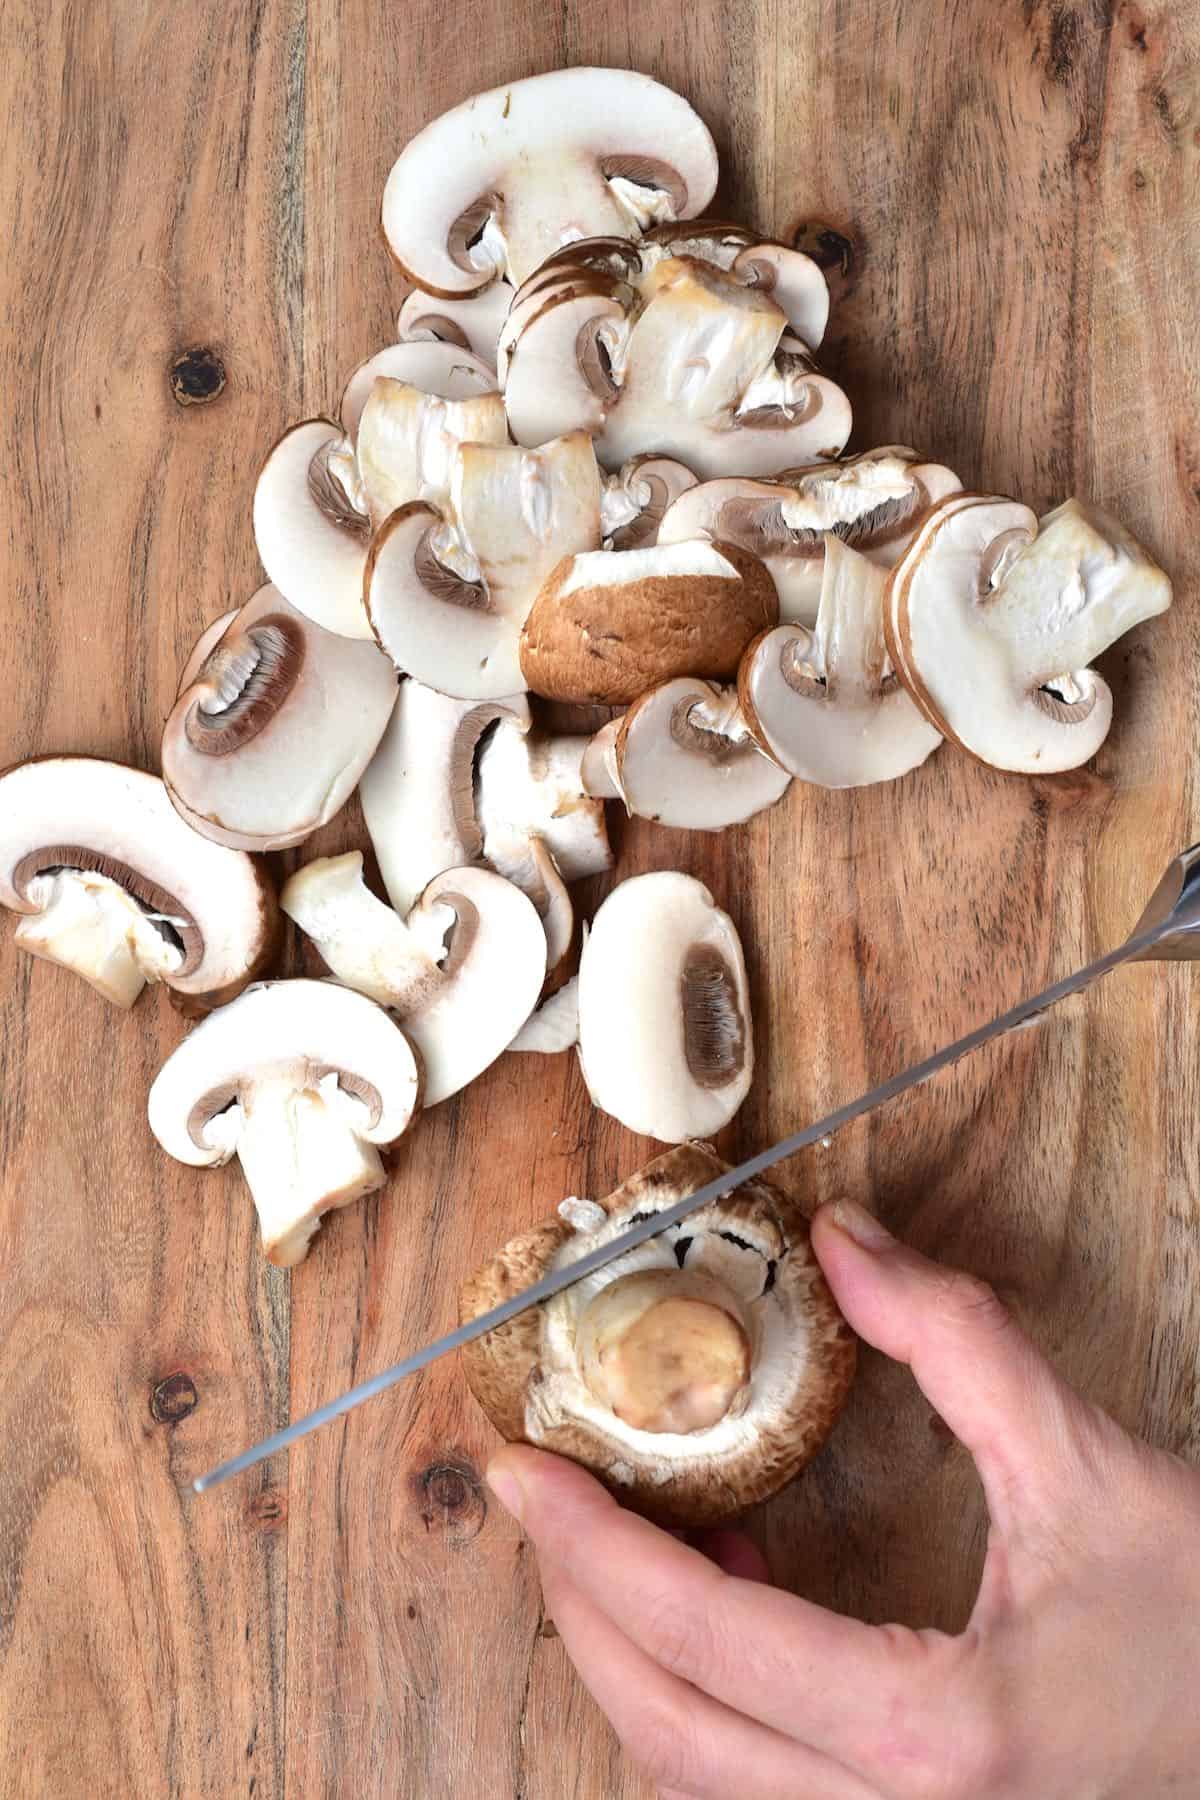 Slicing mushrooms on a wooden chopping board